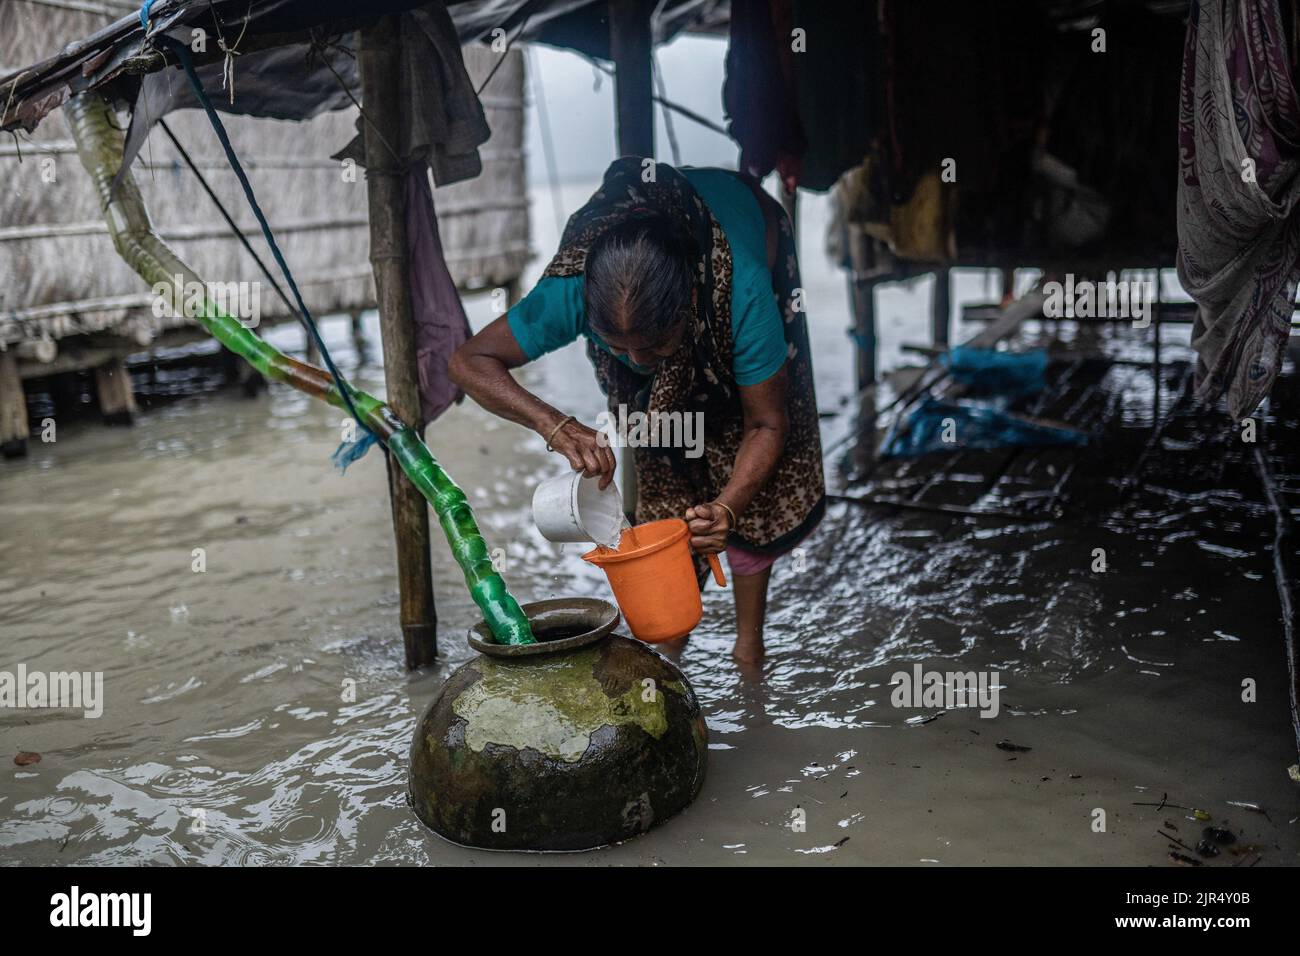 August 19, 2022, Kalabogi, Bangladesh: A woman tries to fill up her mag from the rainwater which comes from the pet bottle-made pipe at Kalabogi village in Khulna. Not too long ago Kalabogi, a coastal village in Bangladesh, was full of cultivable land until the rising sea levels began to swallow the area all the way up to the Bay of Bengal. Frequent cyclones and floods hit the village since the late 1990s. In 2009, a major cyclone named Aila destroyed the country's 1,400 kilometres of embankments, 8,800 kilometres of roads, and about 3, 50,000 acres of farmland. Several hundred people were rep Stock Photo